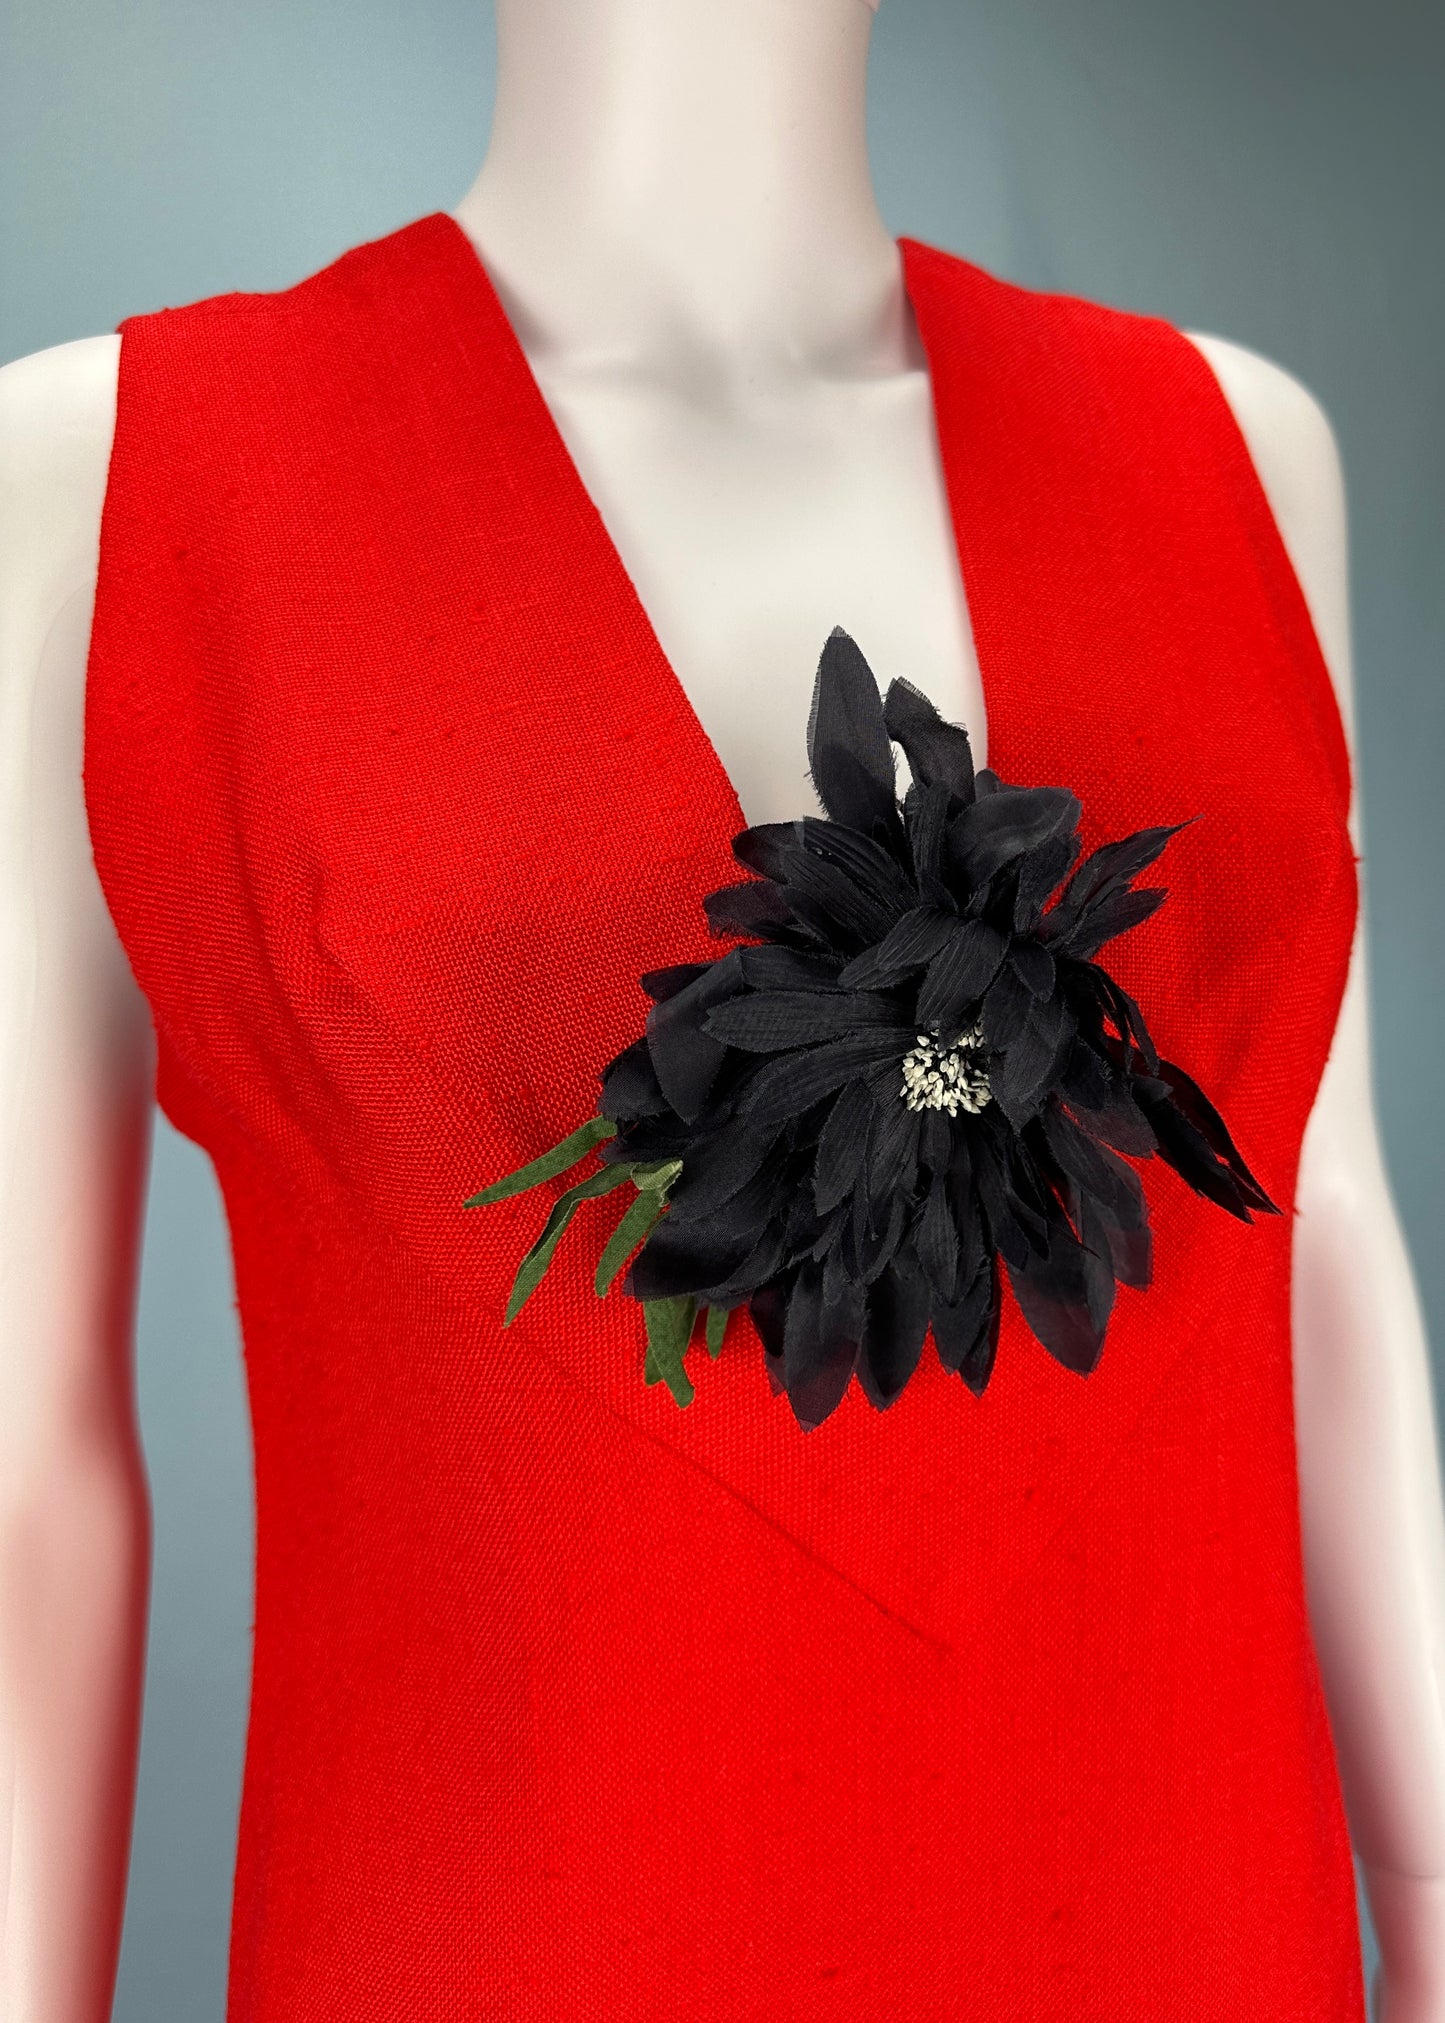 Pierre Cardin 1970’s Red Floral Corsage Dress